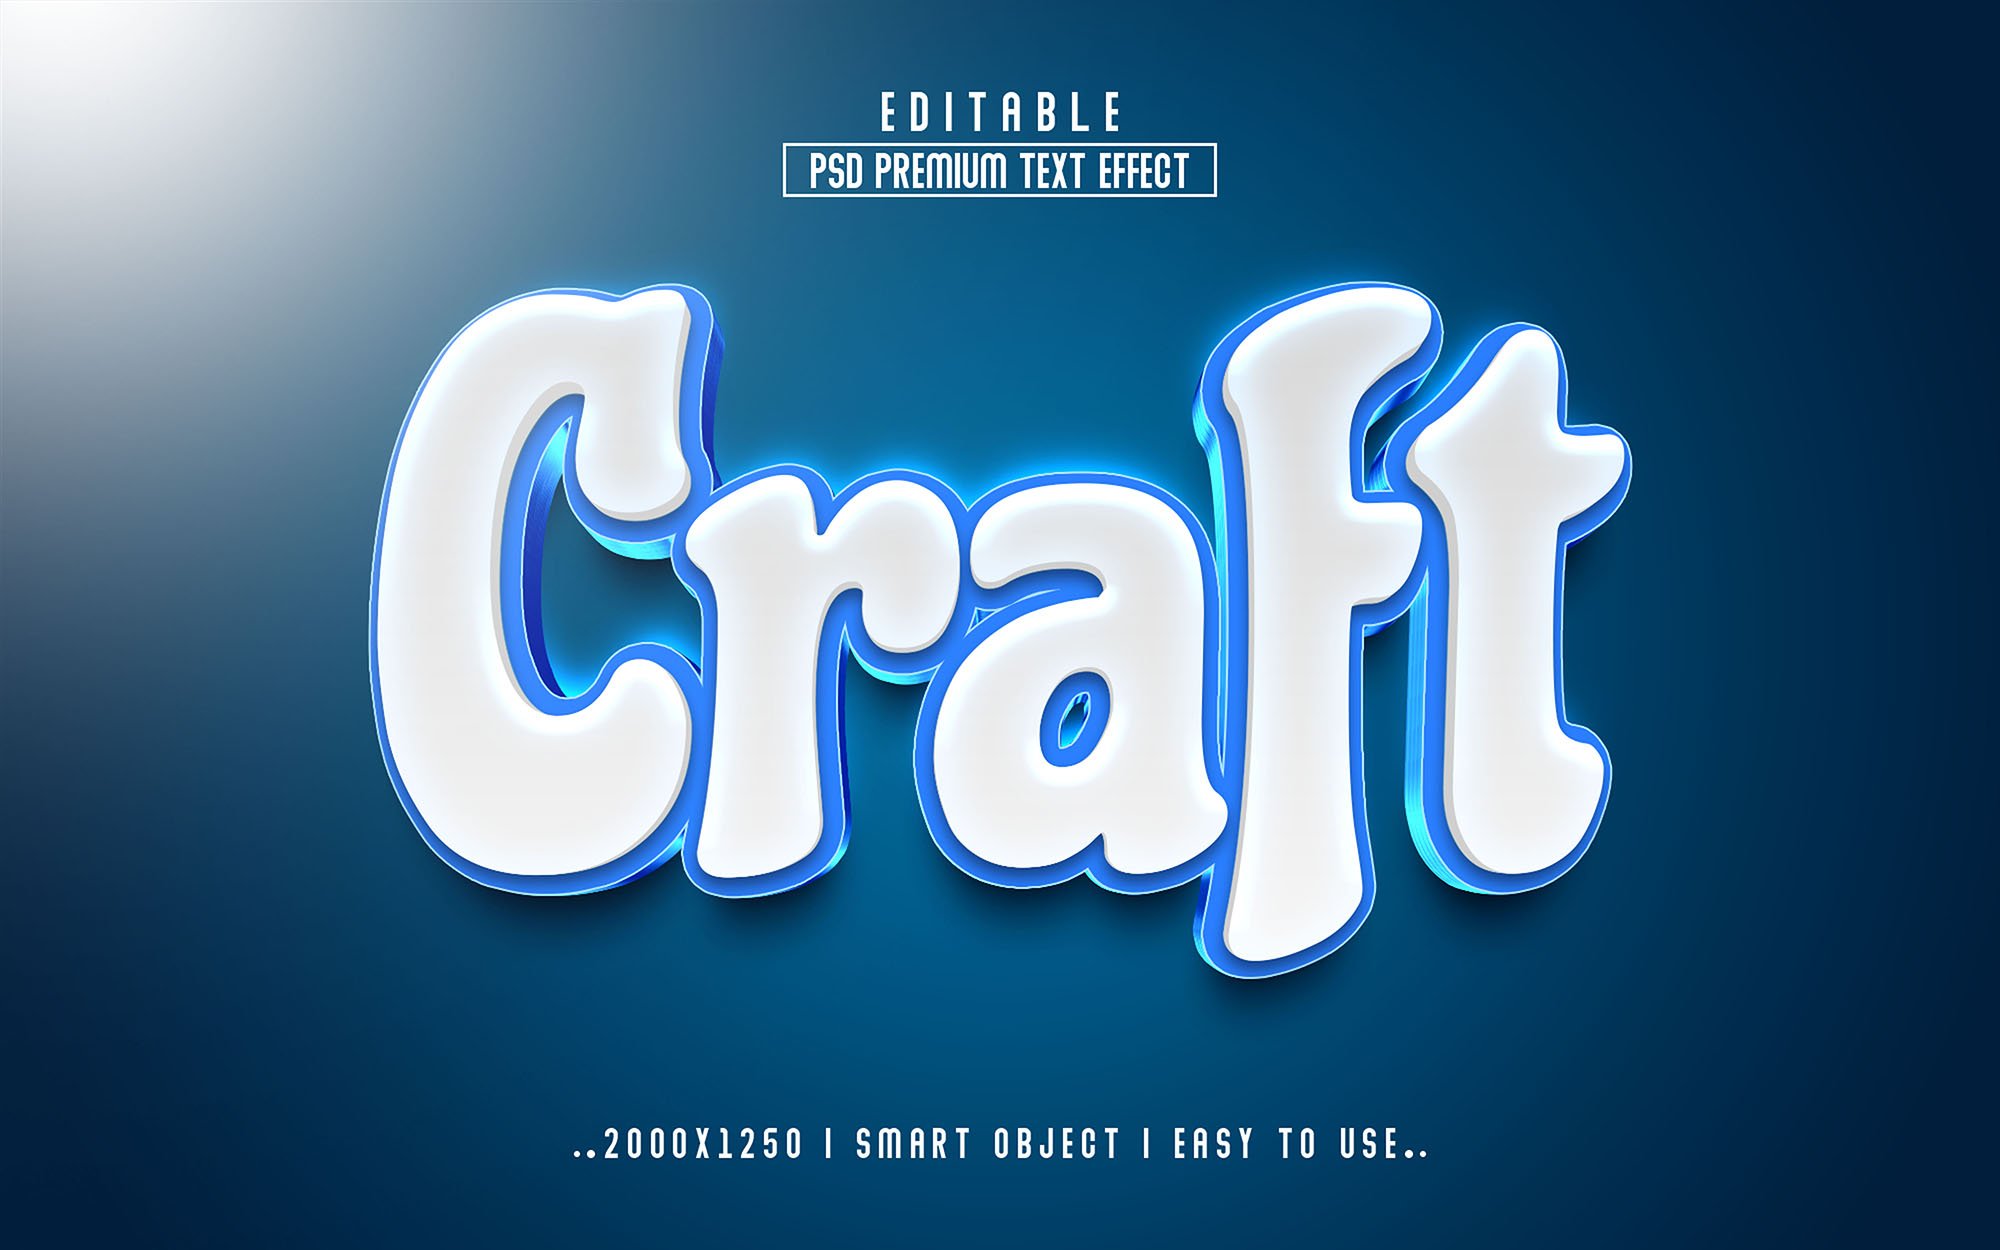 Craft 3D Editable Text Effect stylecover image.